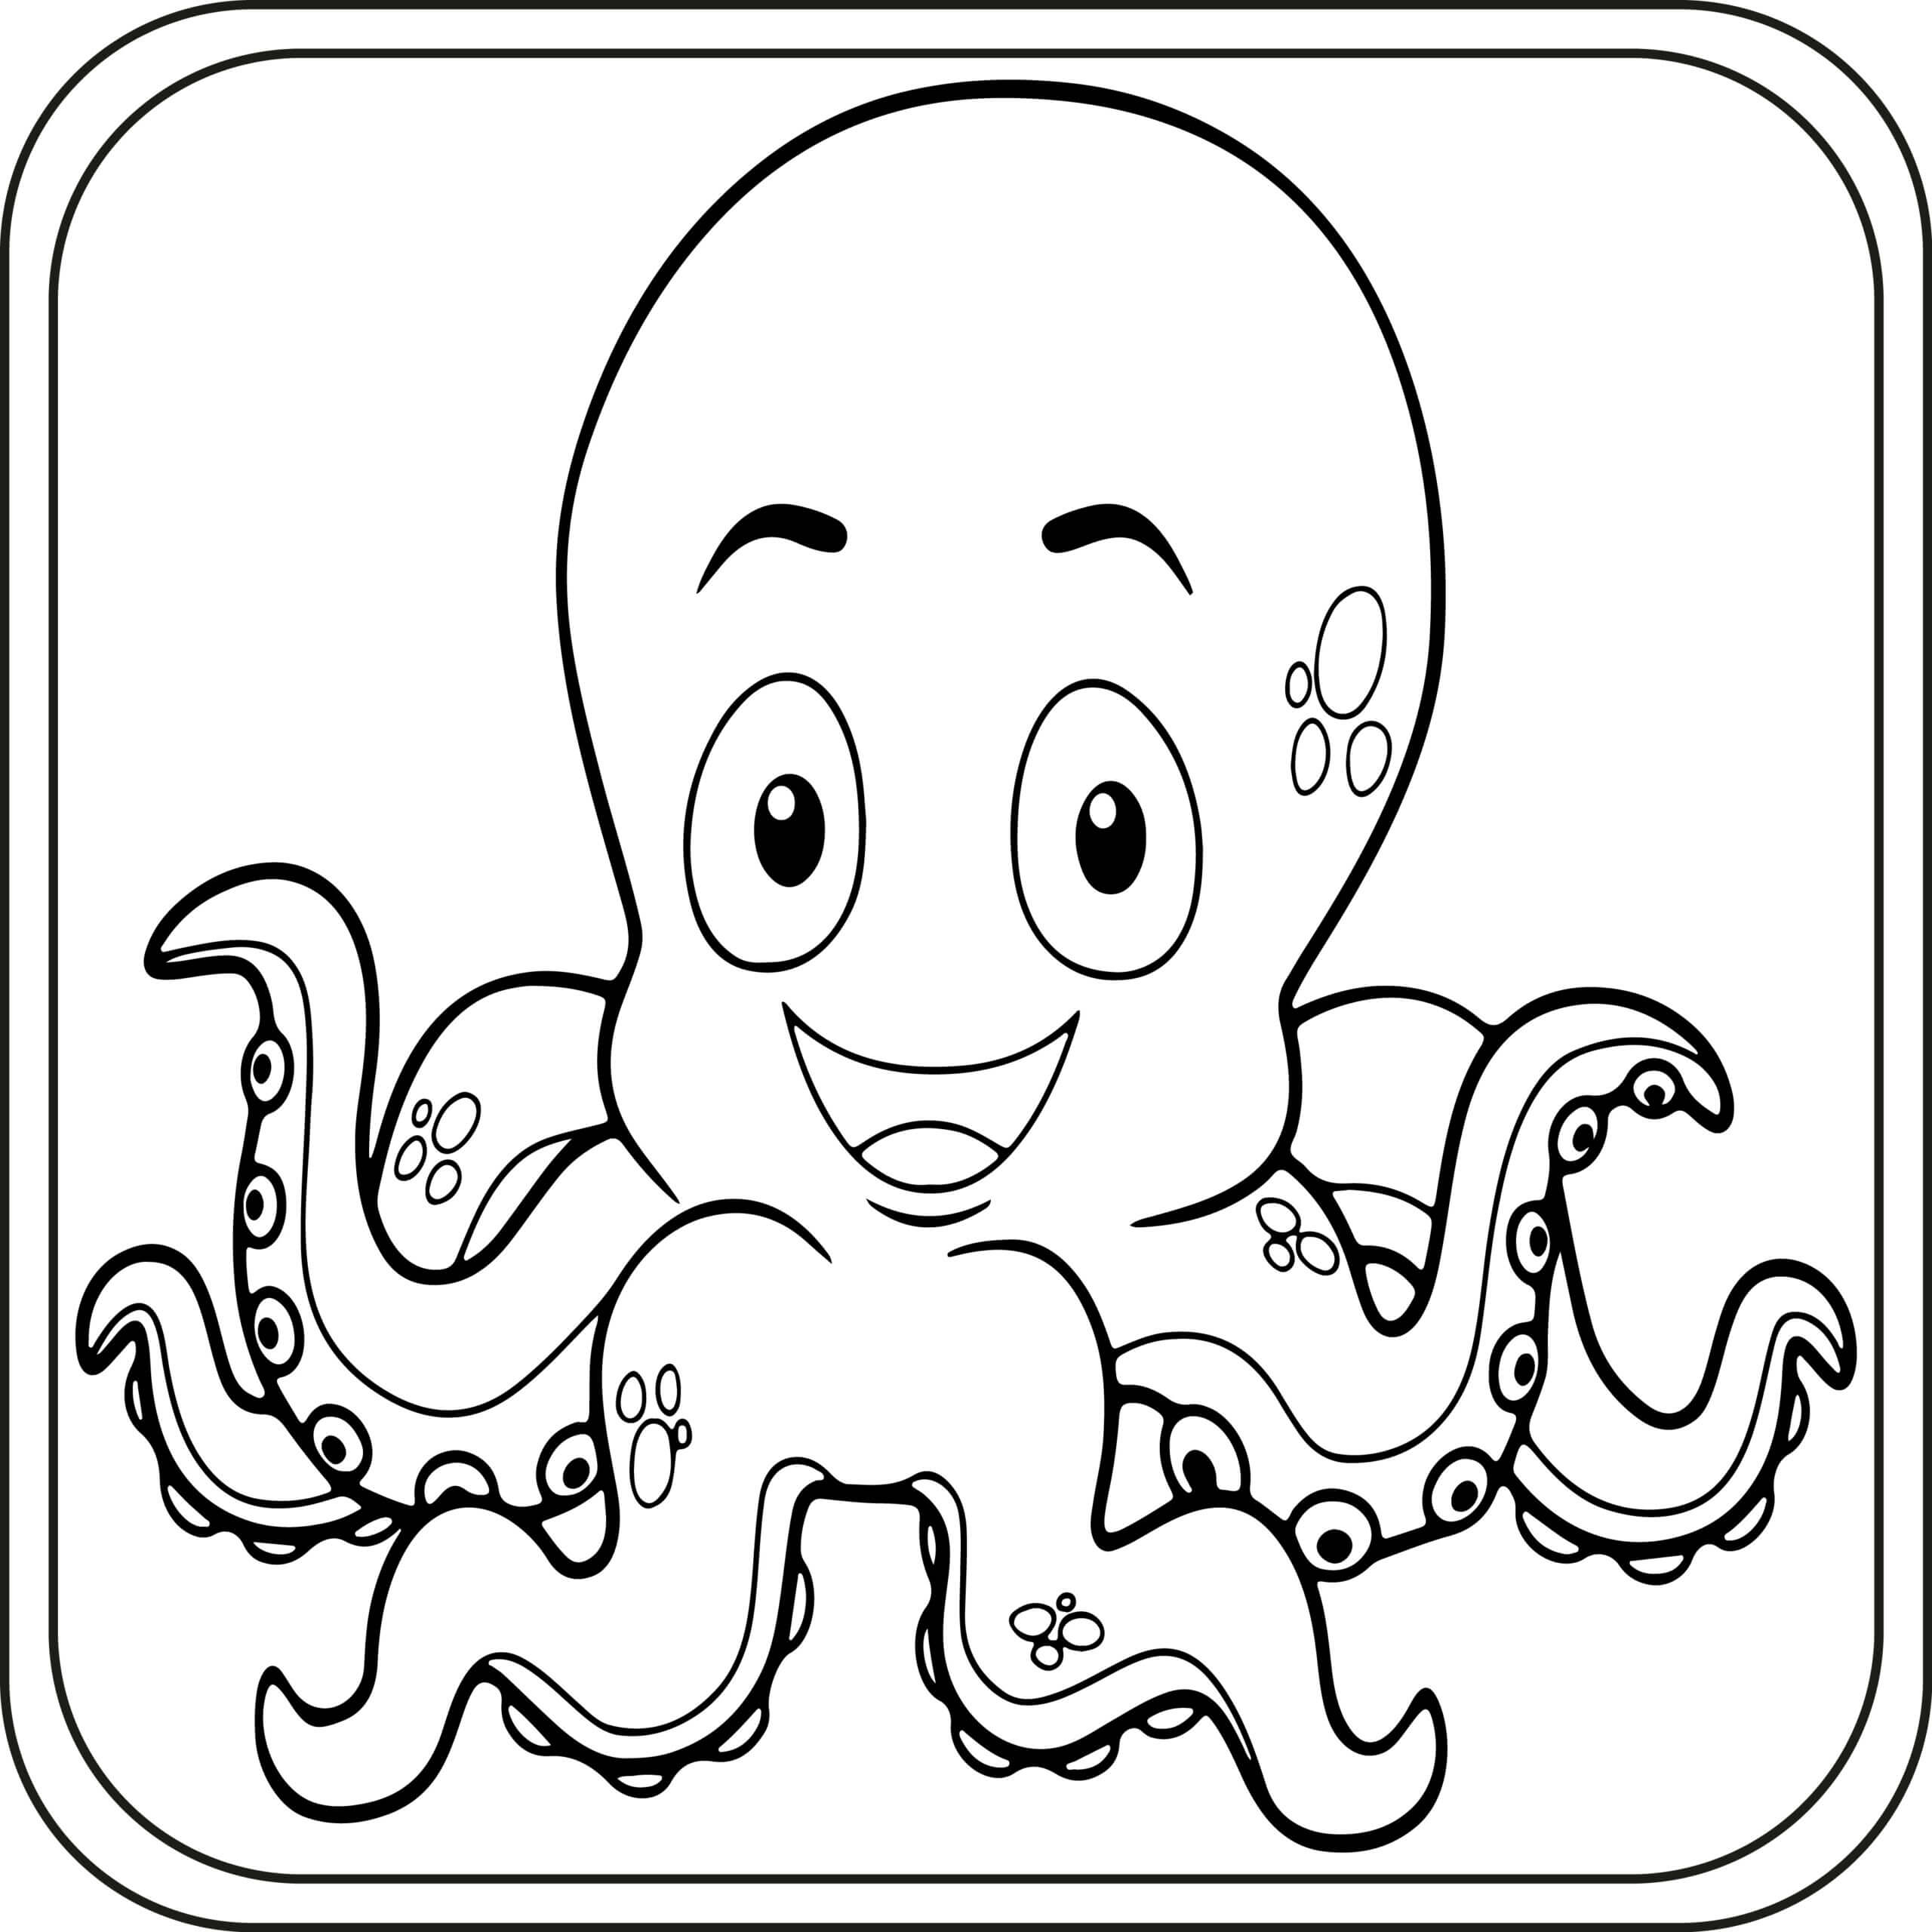 Fun Beautiful Octopus coloring page - Download, Print or Color Online ...